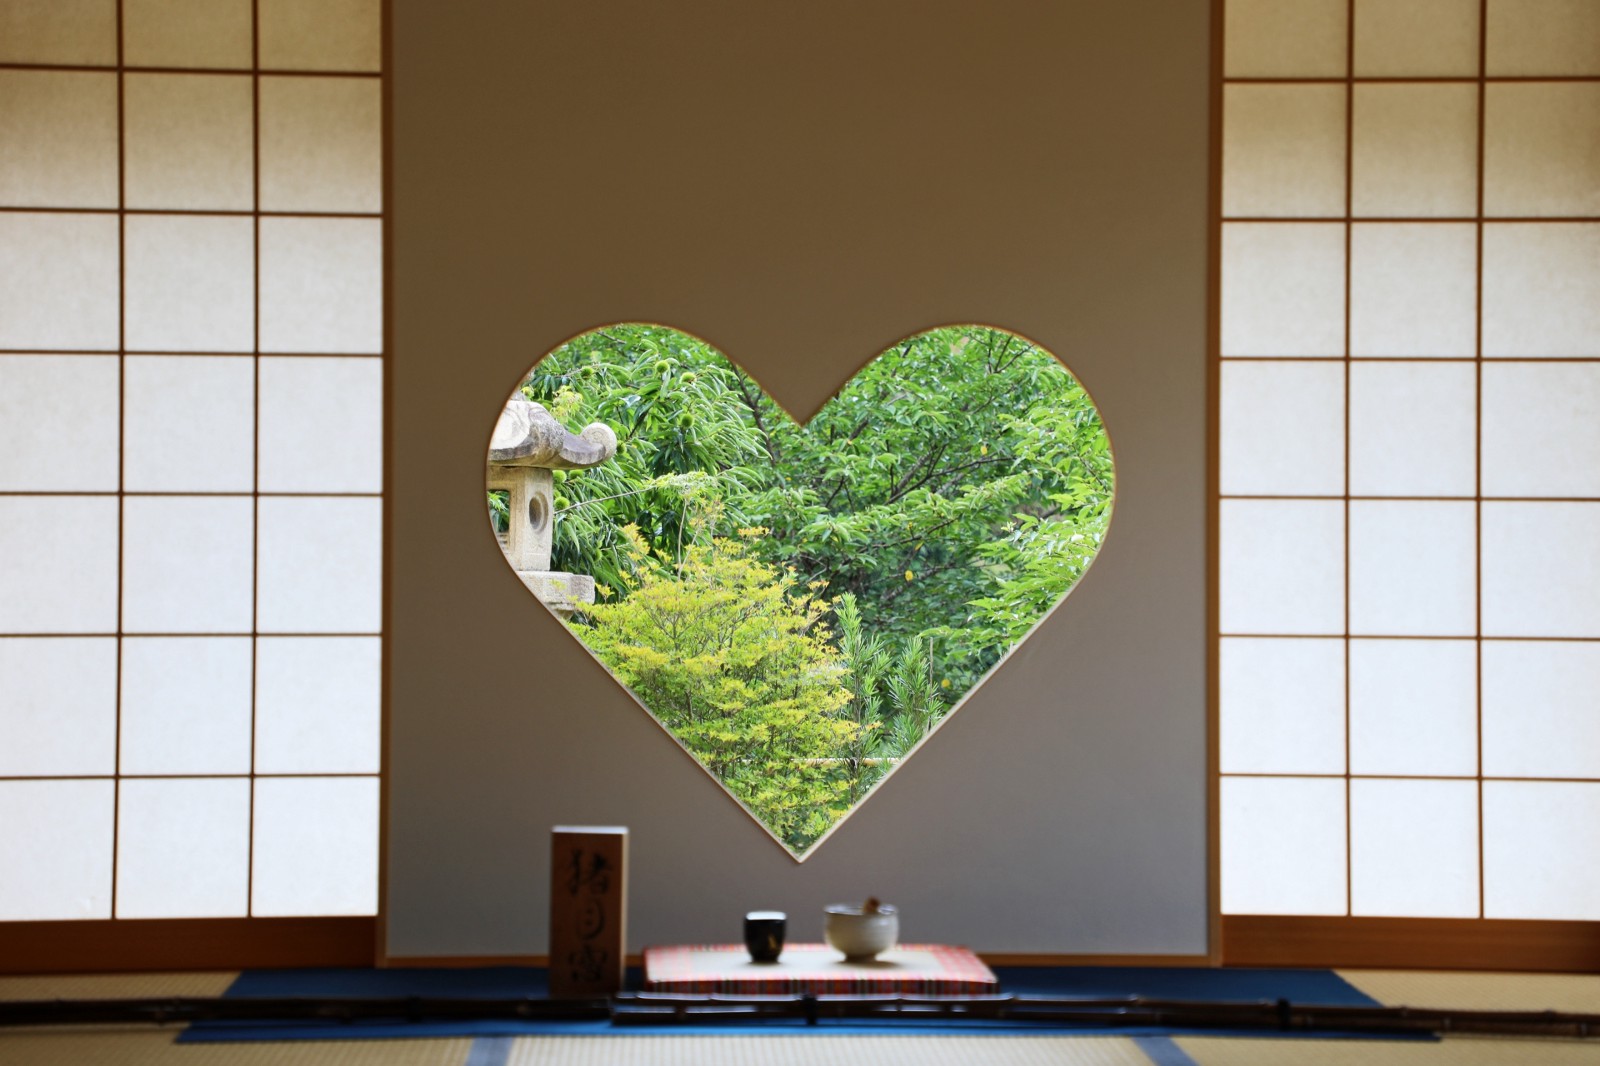 The famous heart-shaped window at Shoujuin Temple